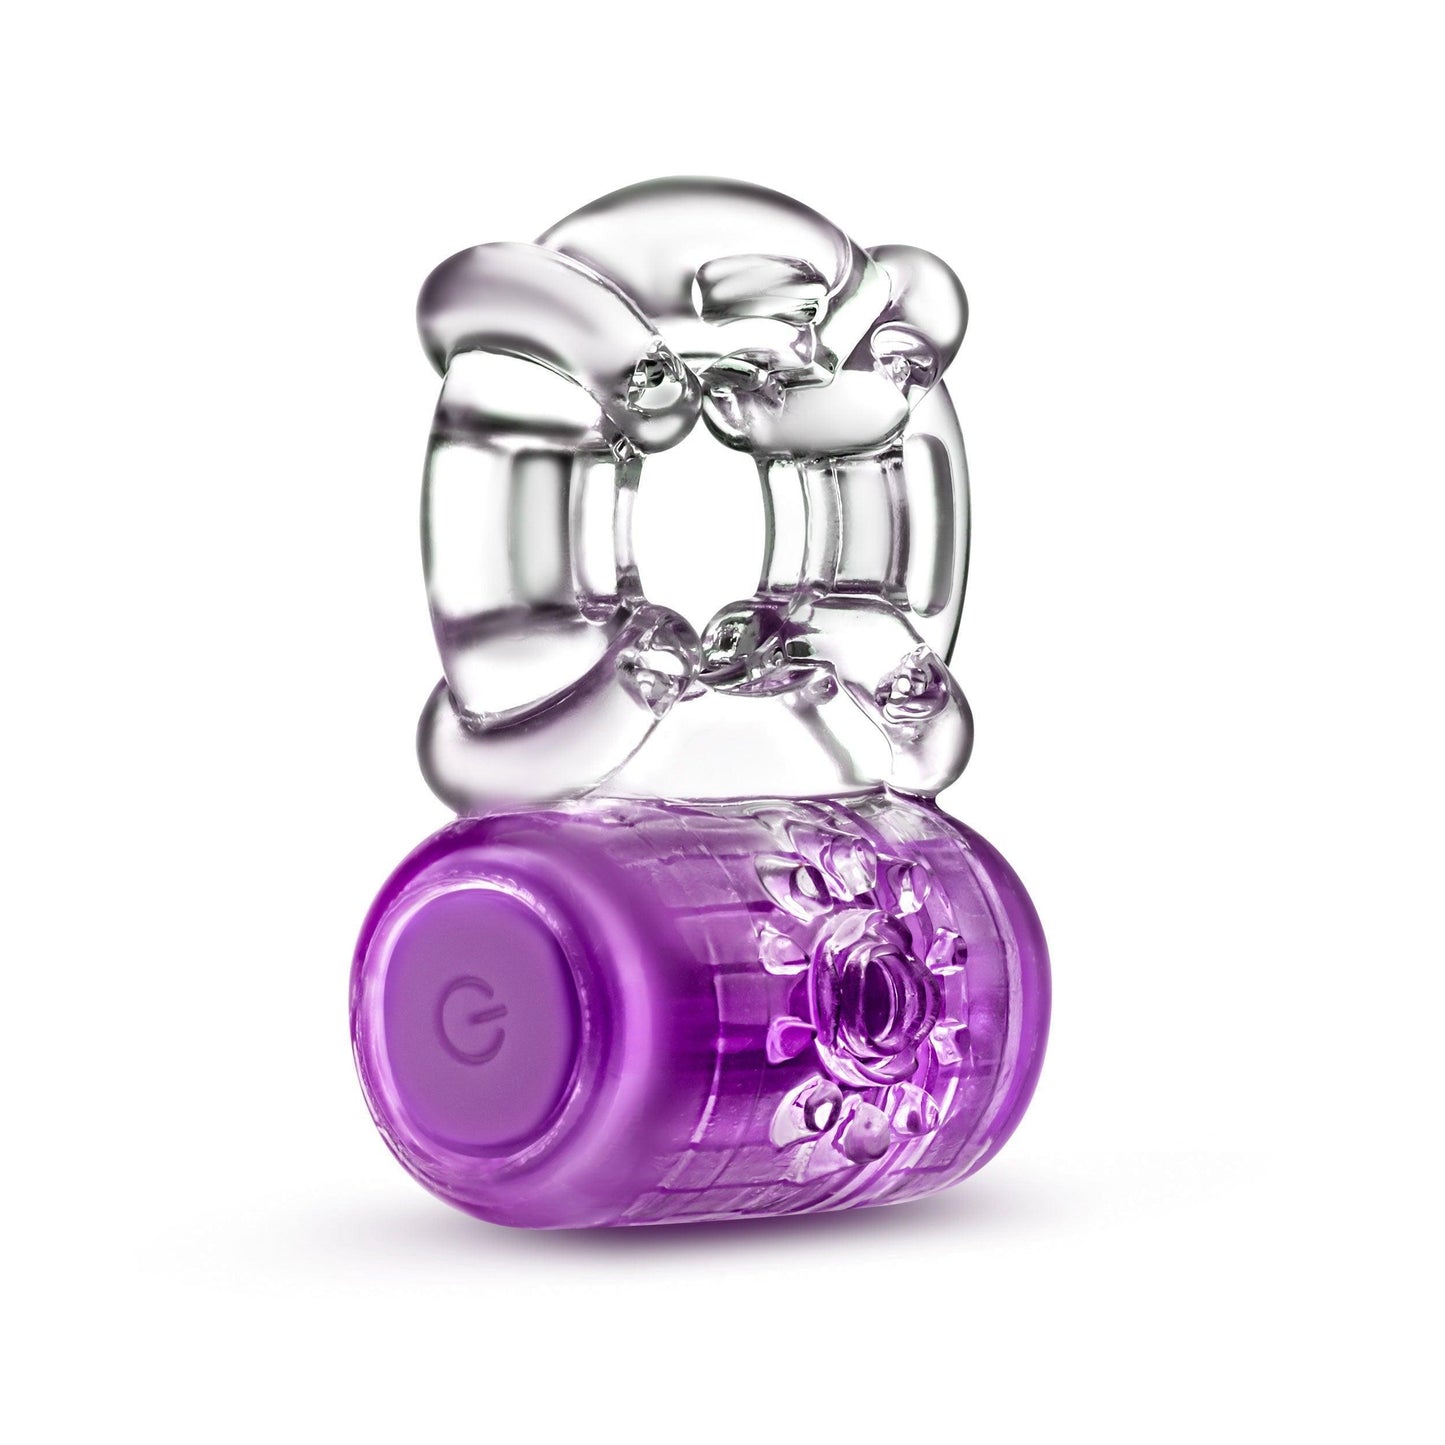 Play With Me - One Night Stand Vibrating C-Ring - Purple - My Sex Toy Hub